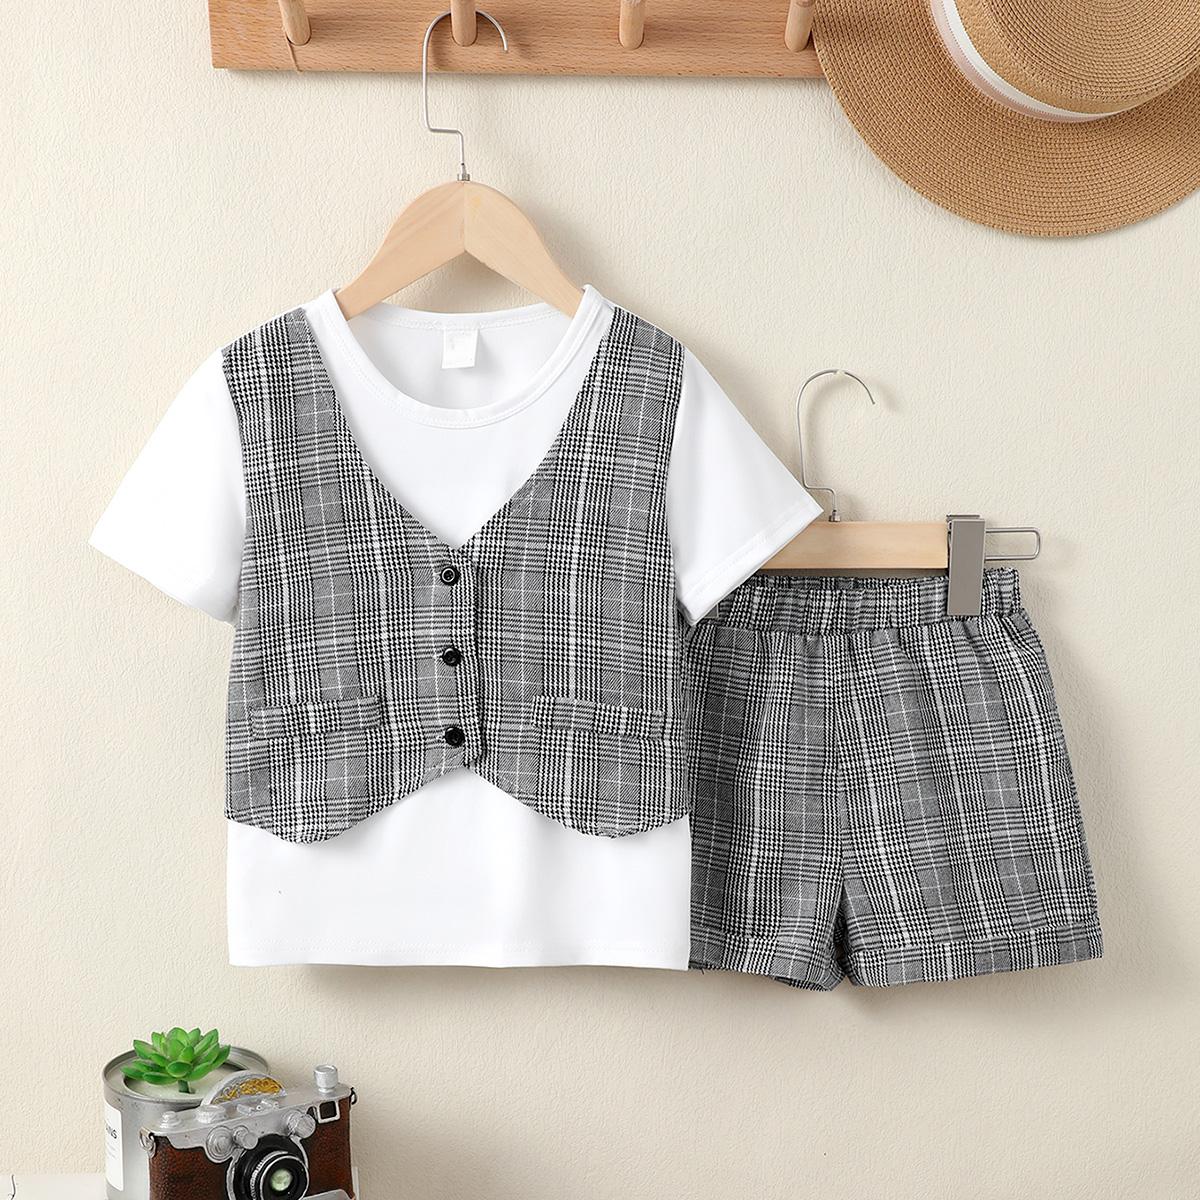 4-7Y Kids Fashion Boys Clothes Baby Gentle Outfits Plaid Short Sleeve Tops Shorts White Catpapa 112211156